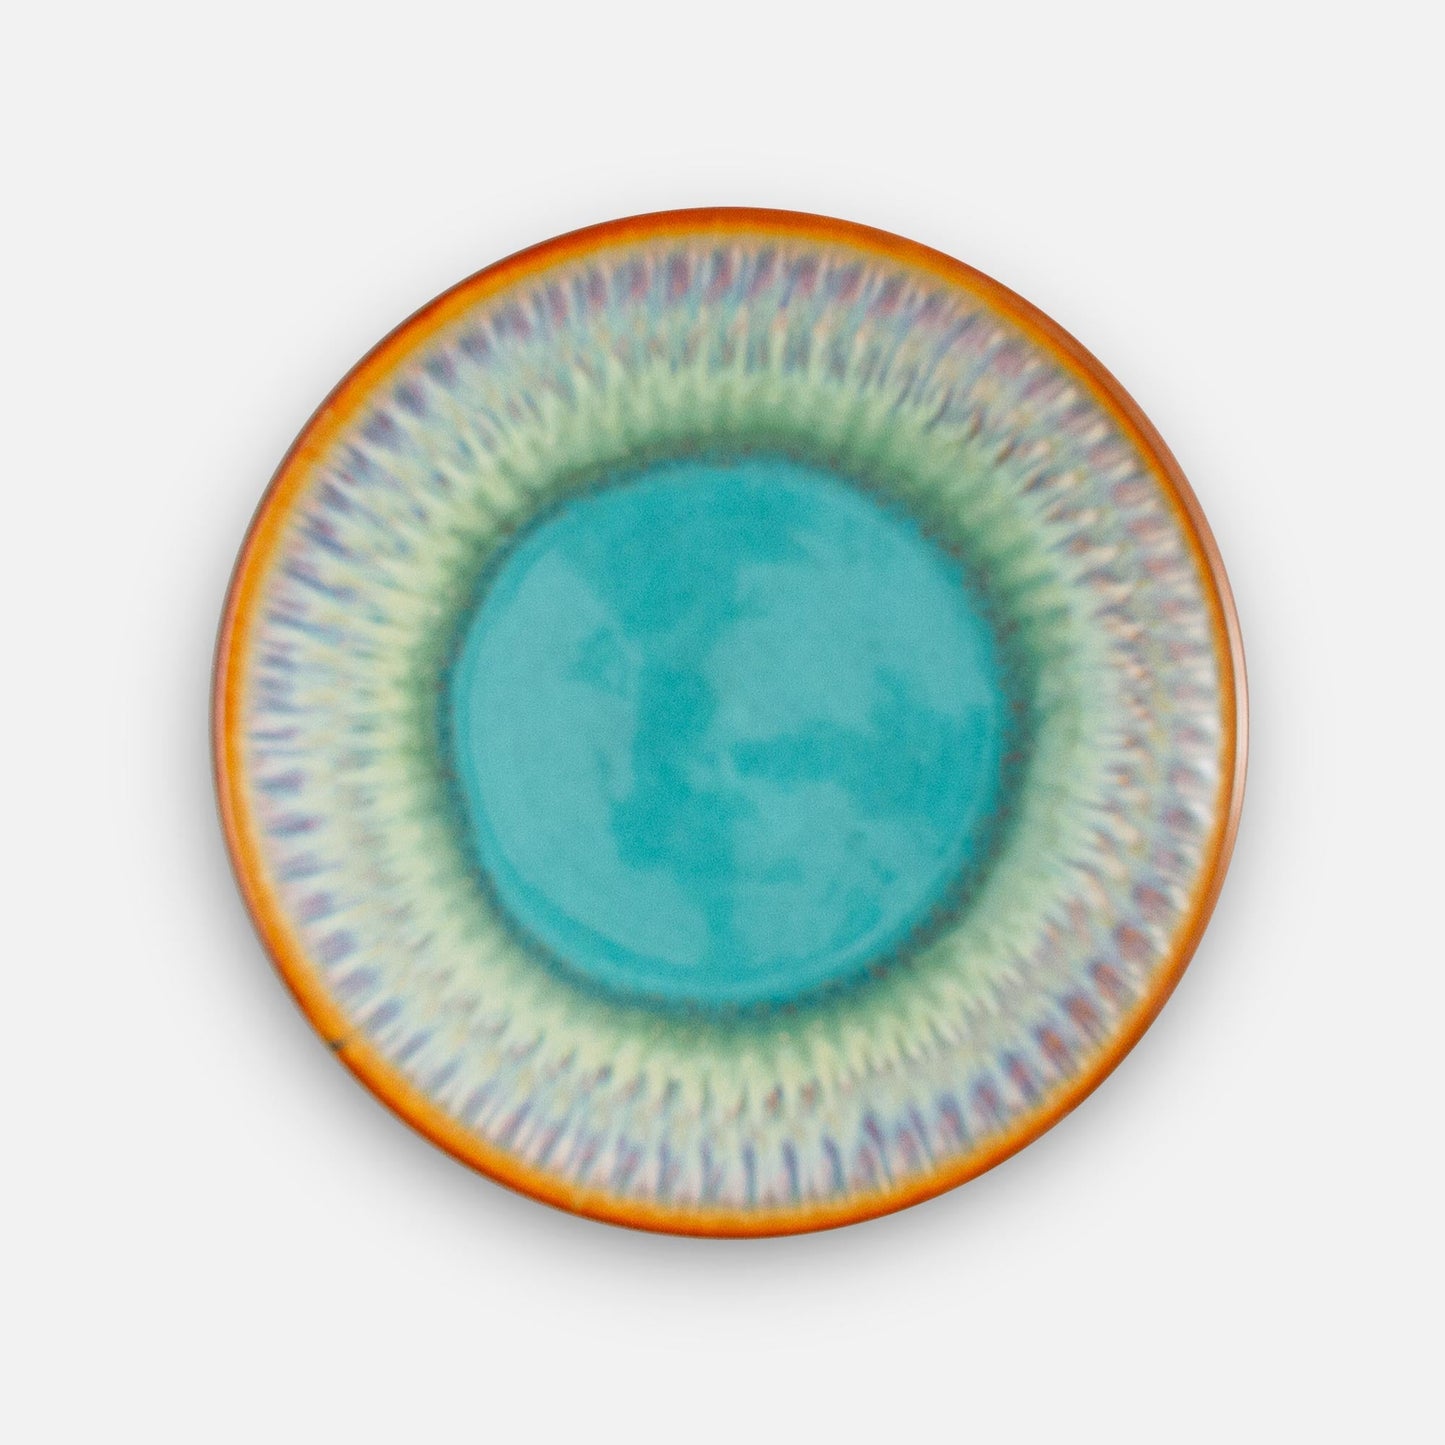 Handmade Pottery Rimless Dessert Plate made by Georgetown Pottery in Maine in Green oribe purple pattern